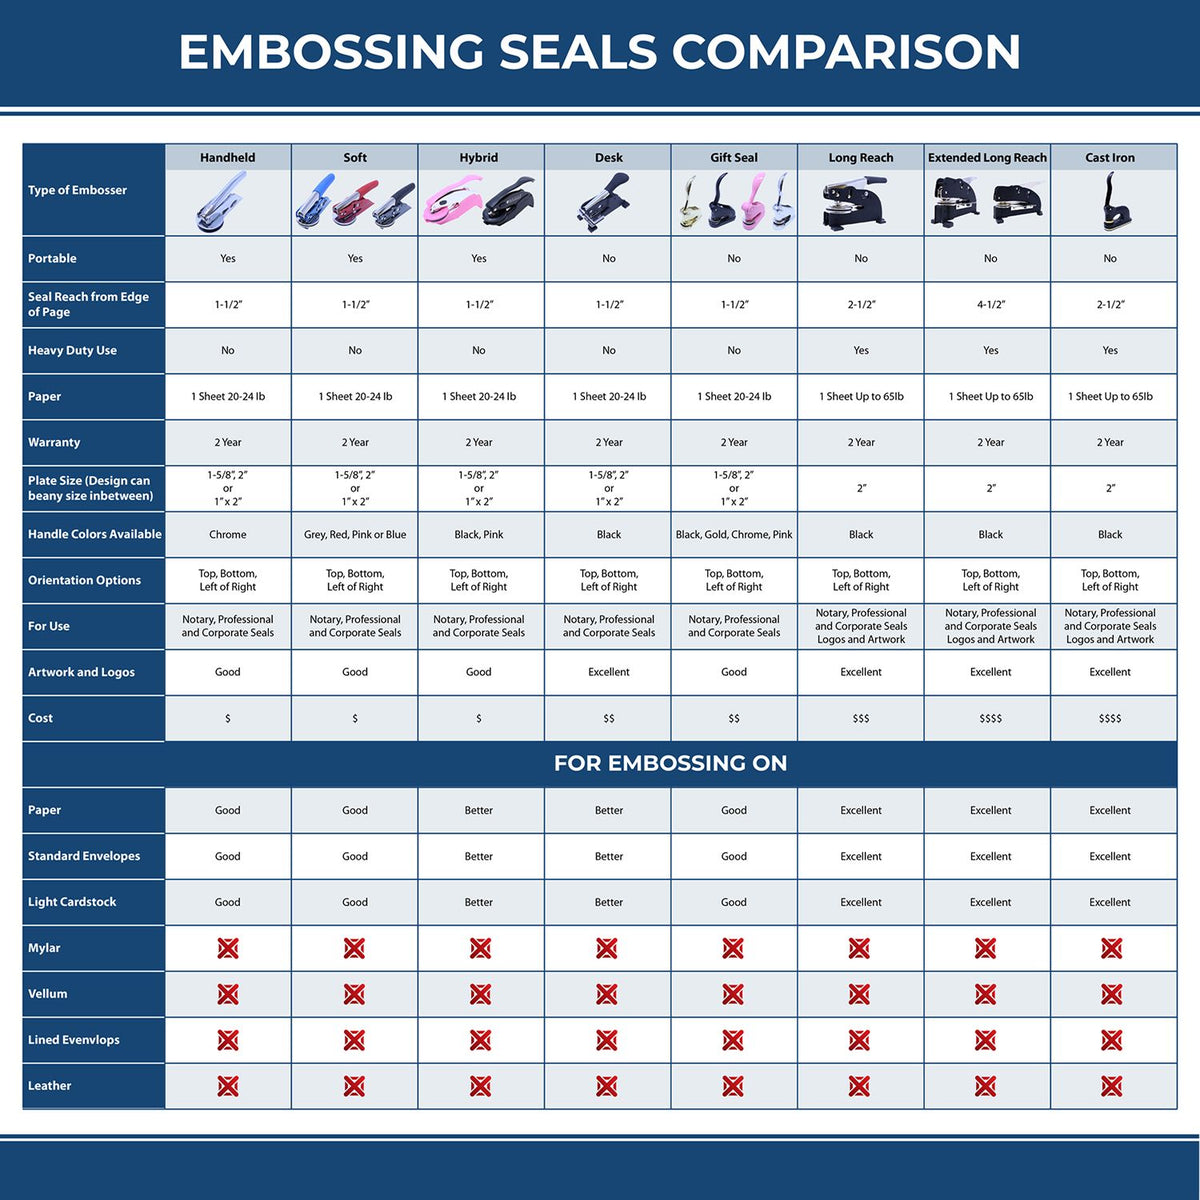 A comparison chart for the different types of mount models available for the Hybrid Maryland Architect Seal